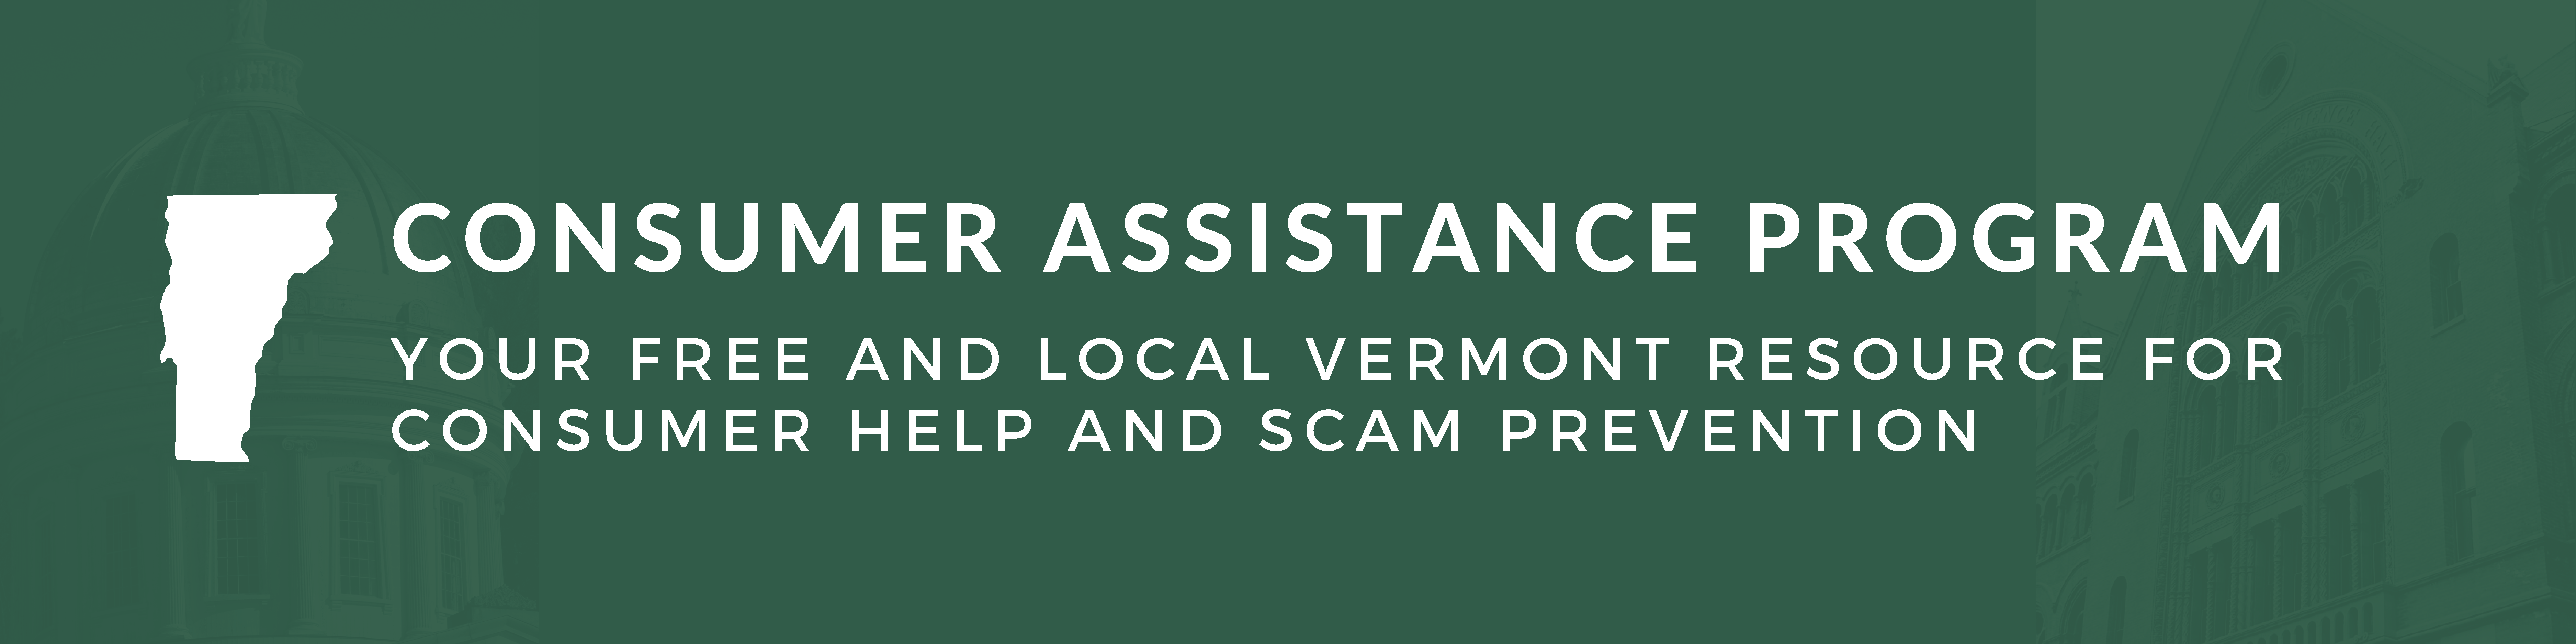 Consumer Assistance Program, Your free and local Vermont resource for consumer help and scam prevention